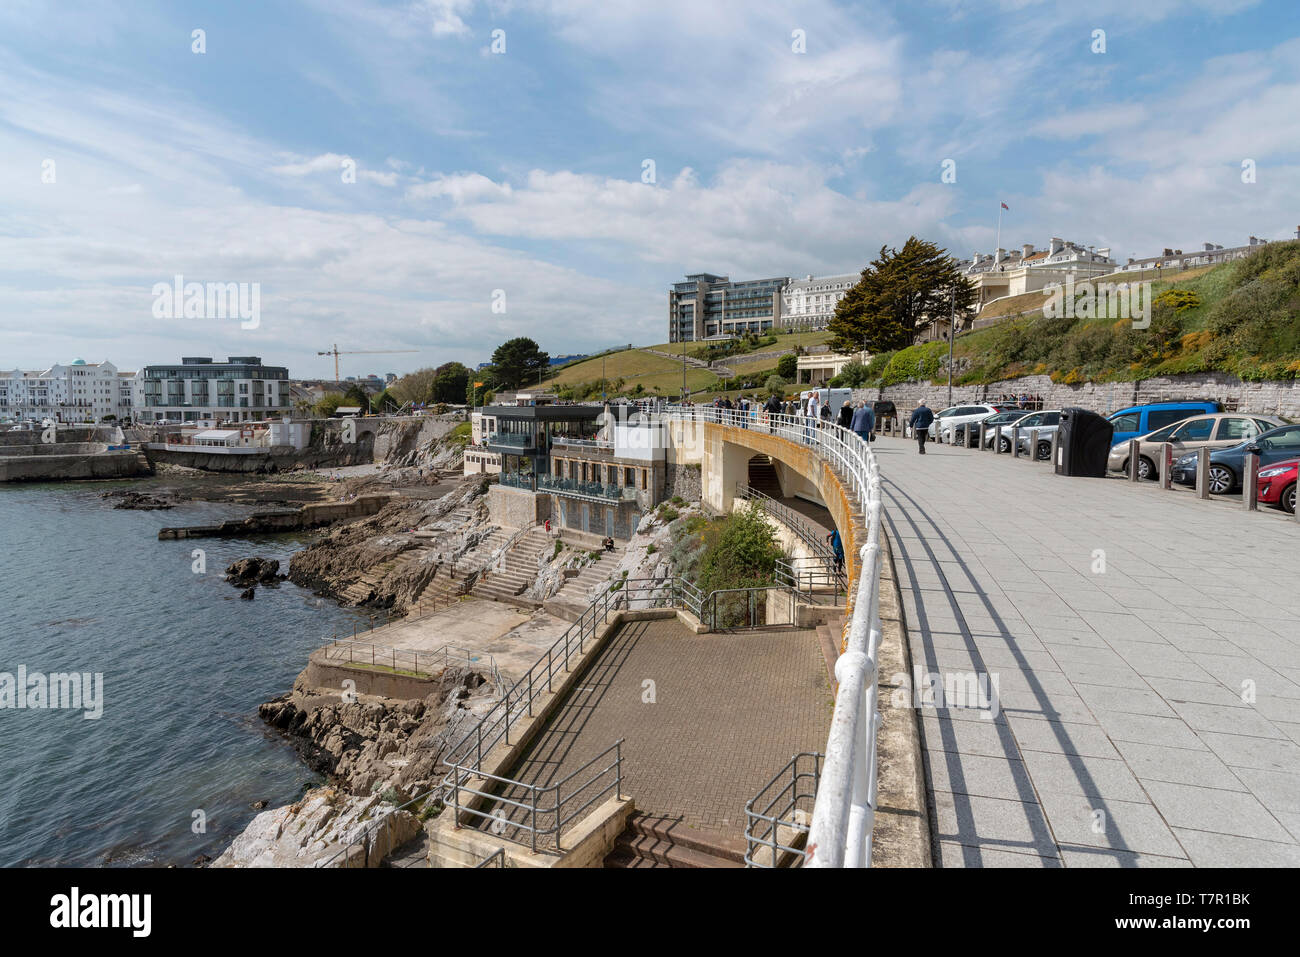 Plymouth, Devon, England, UK. May 2019. People walking on the waterfront with a view of property on The Hoe area of Plymouth and the lower Colonnade Stock Photo